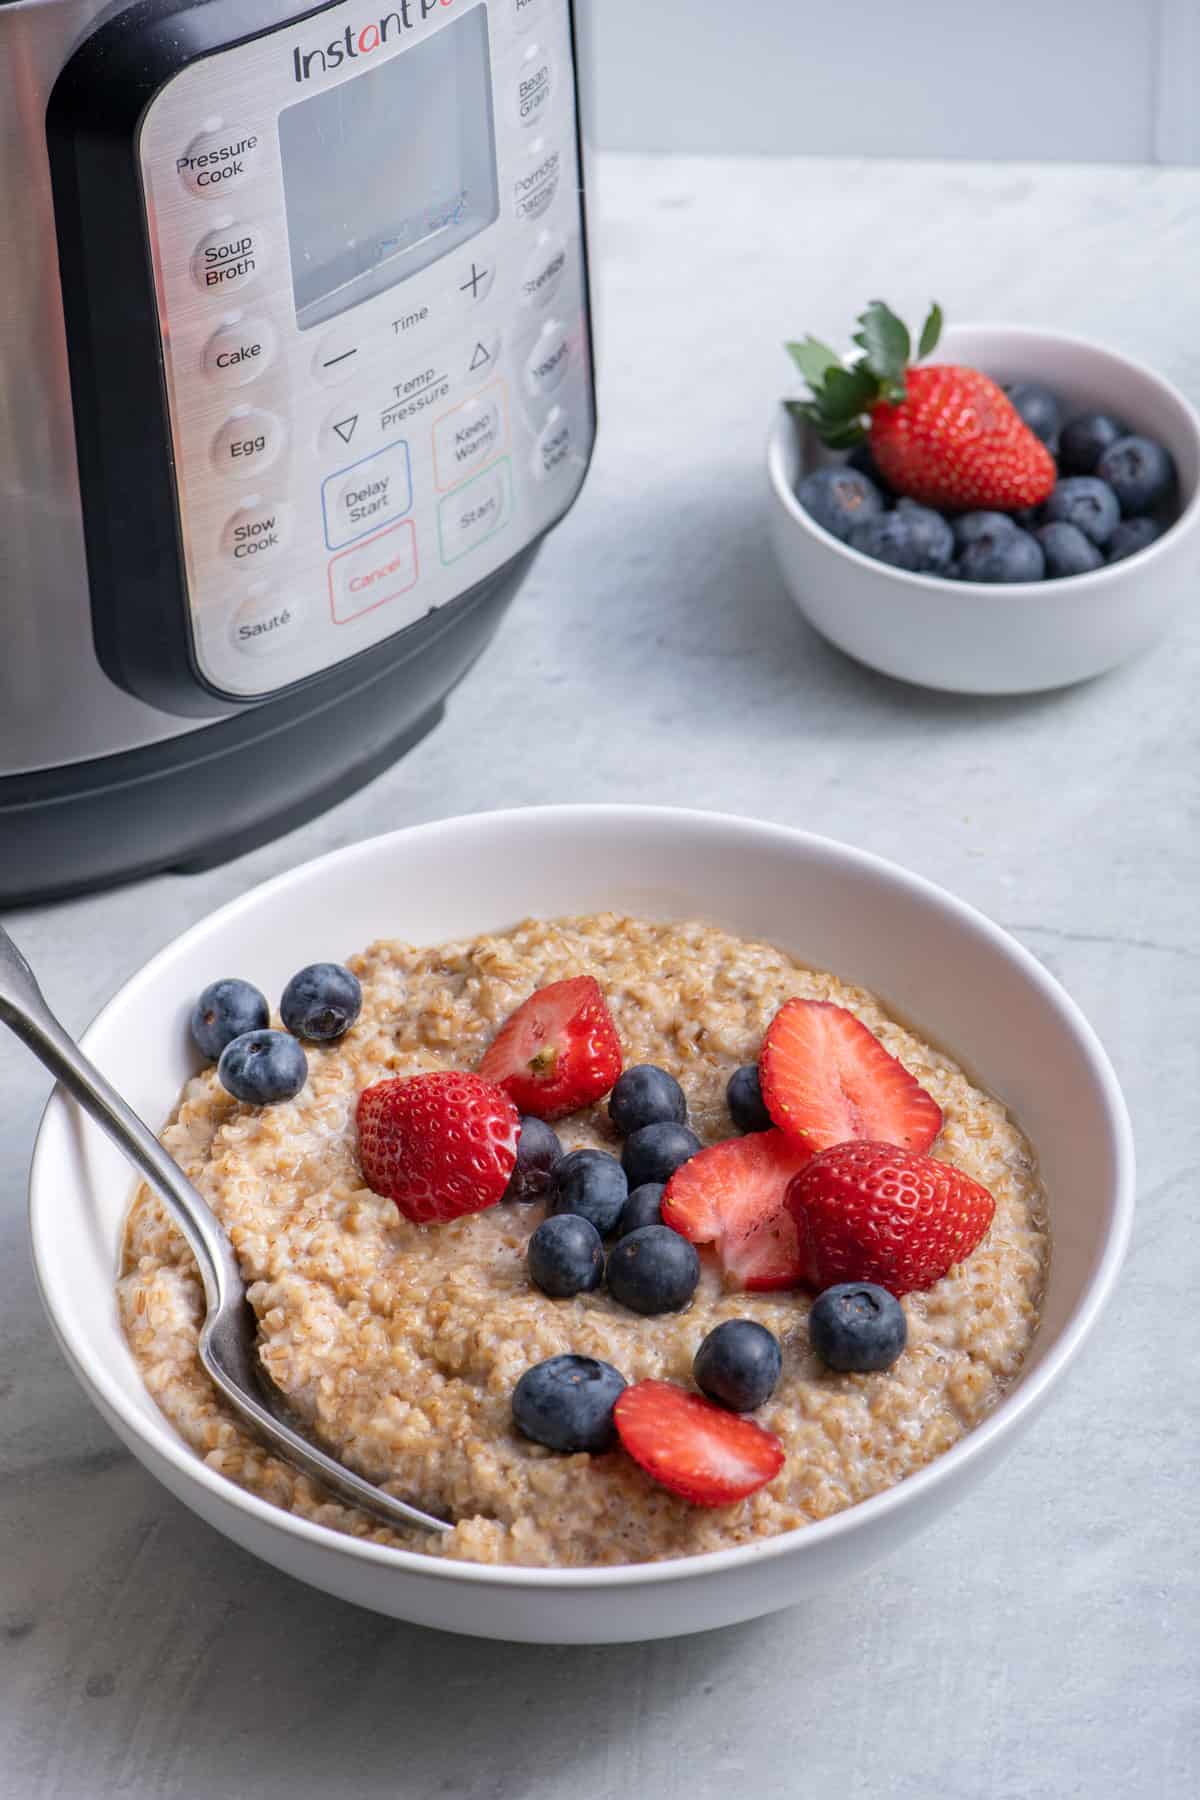 Steel cut oatmeal bowl with a spoon and the instant pot behind it